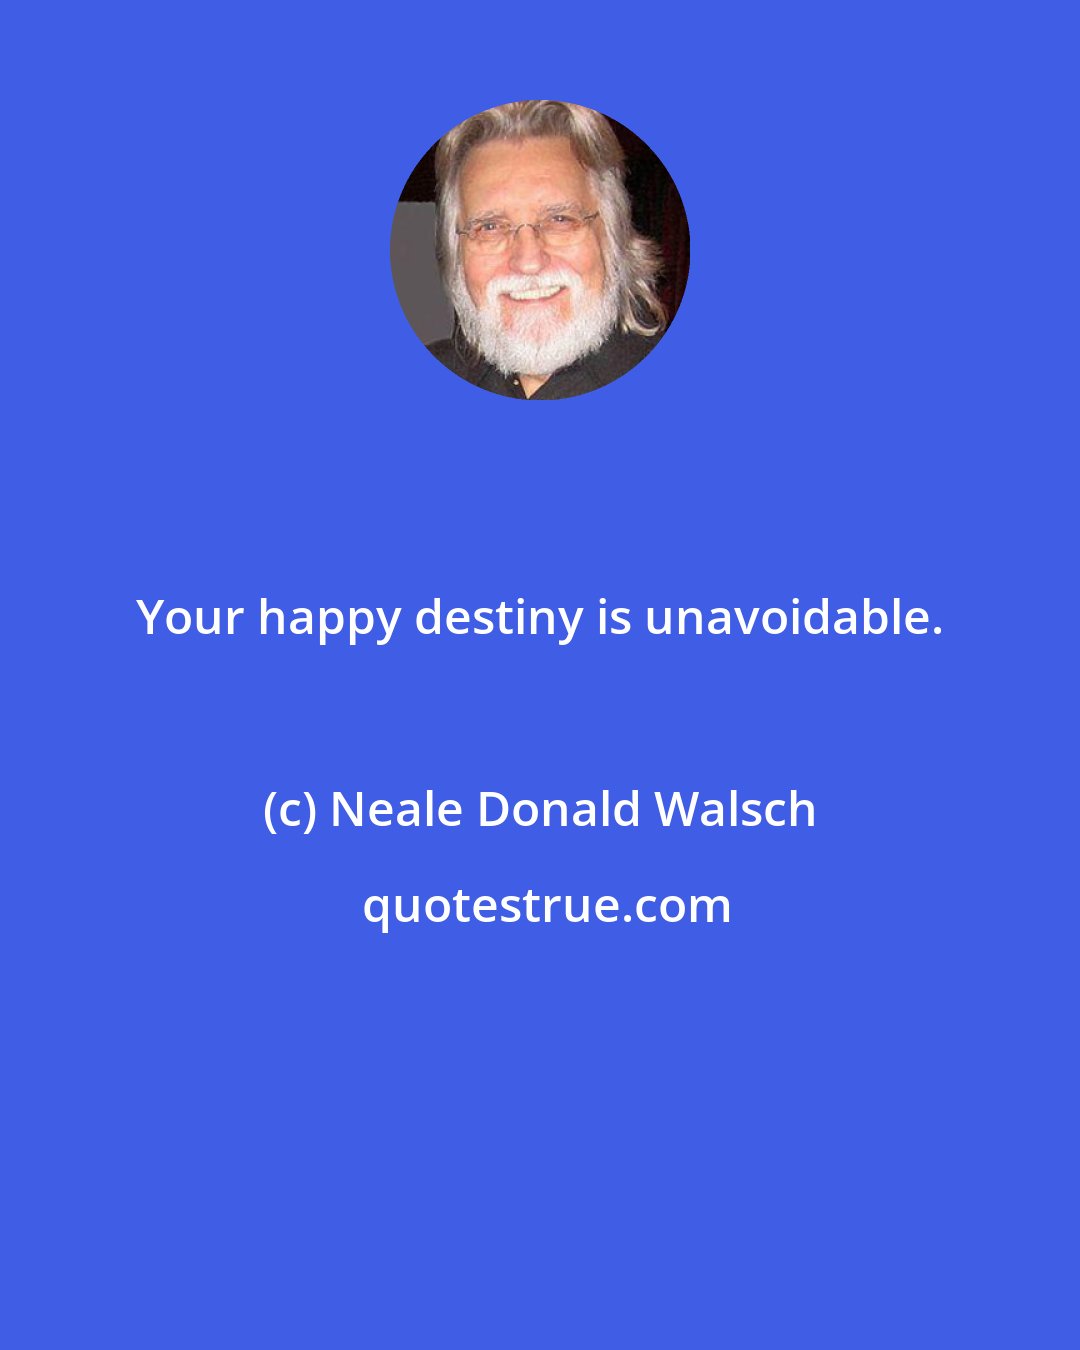 Neale Donald Walsch: Your happy destiny is unavoidable.